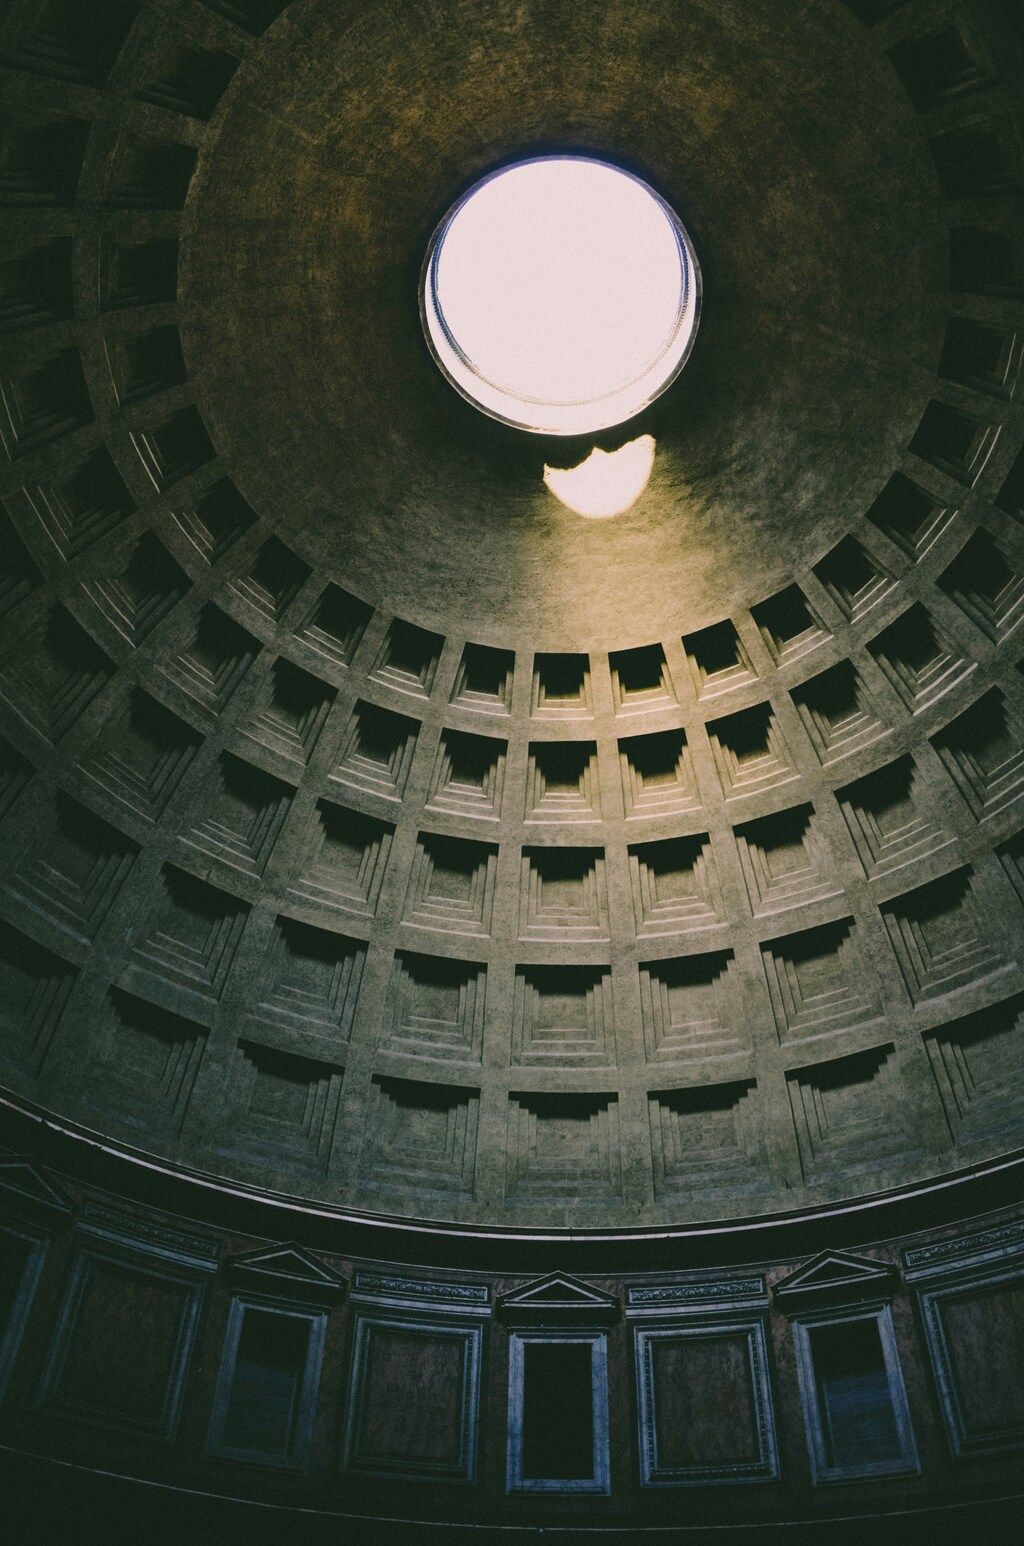 Interior view of the Pantheon in Rome, showcasing the coffered concrete dome with a central oculus that illuminates the cylindrical building.